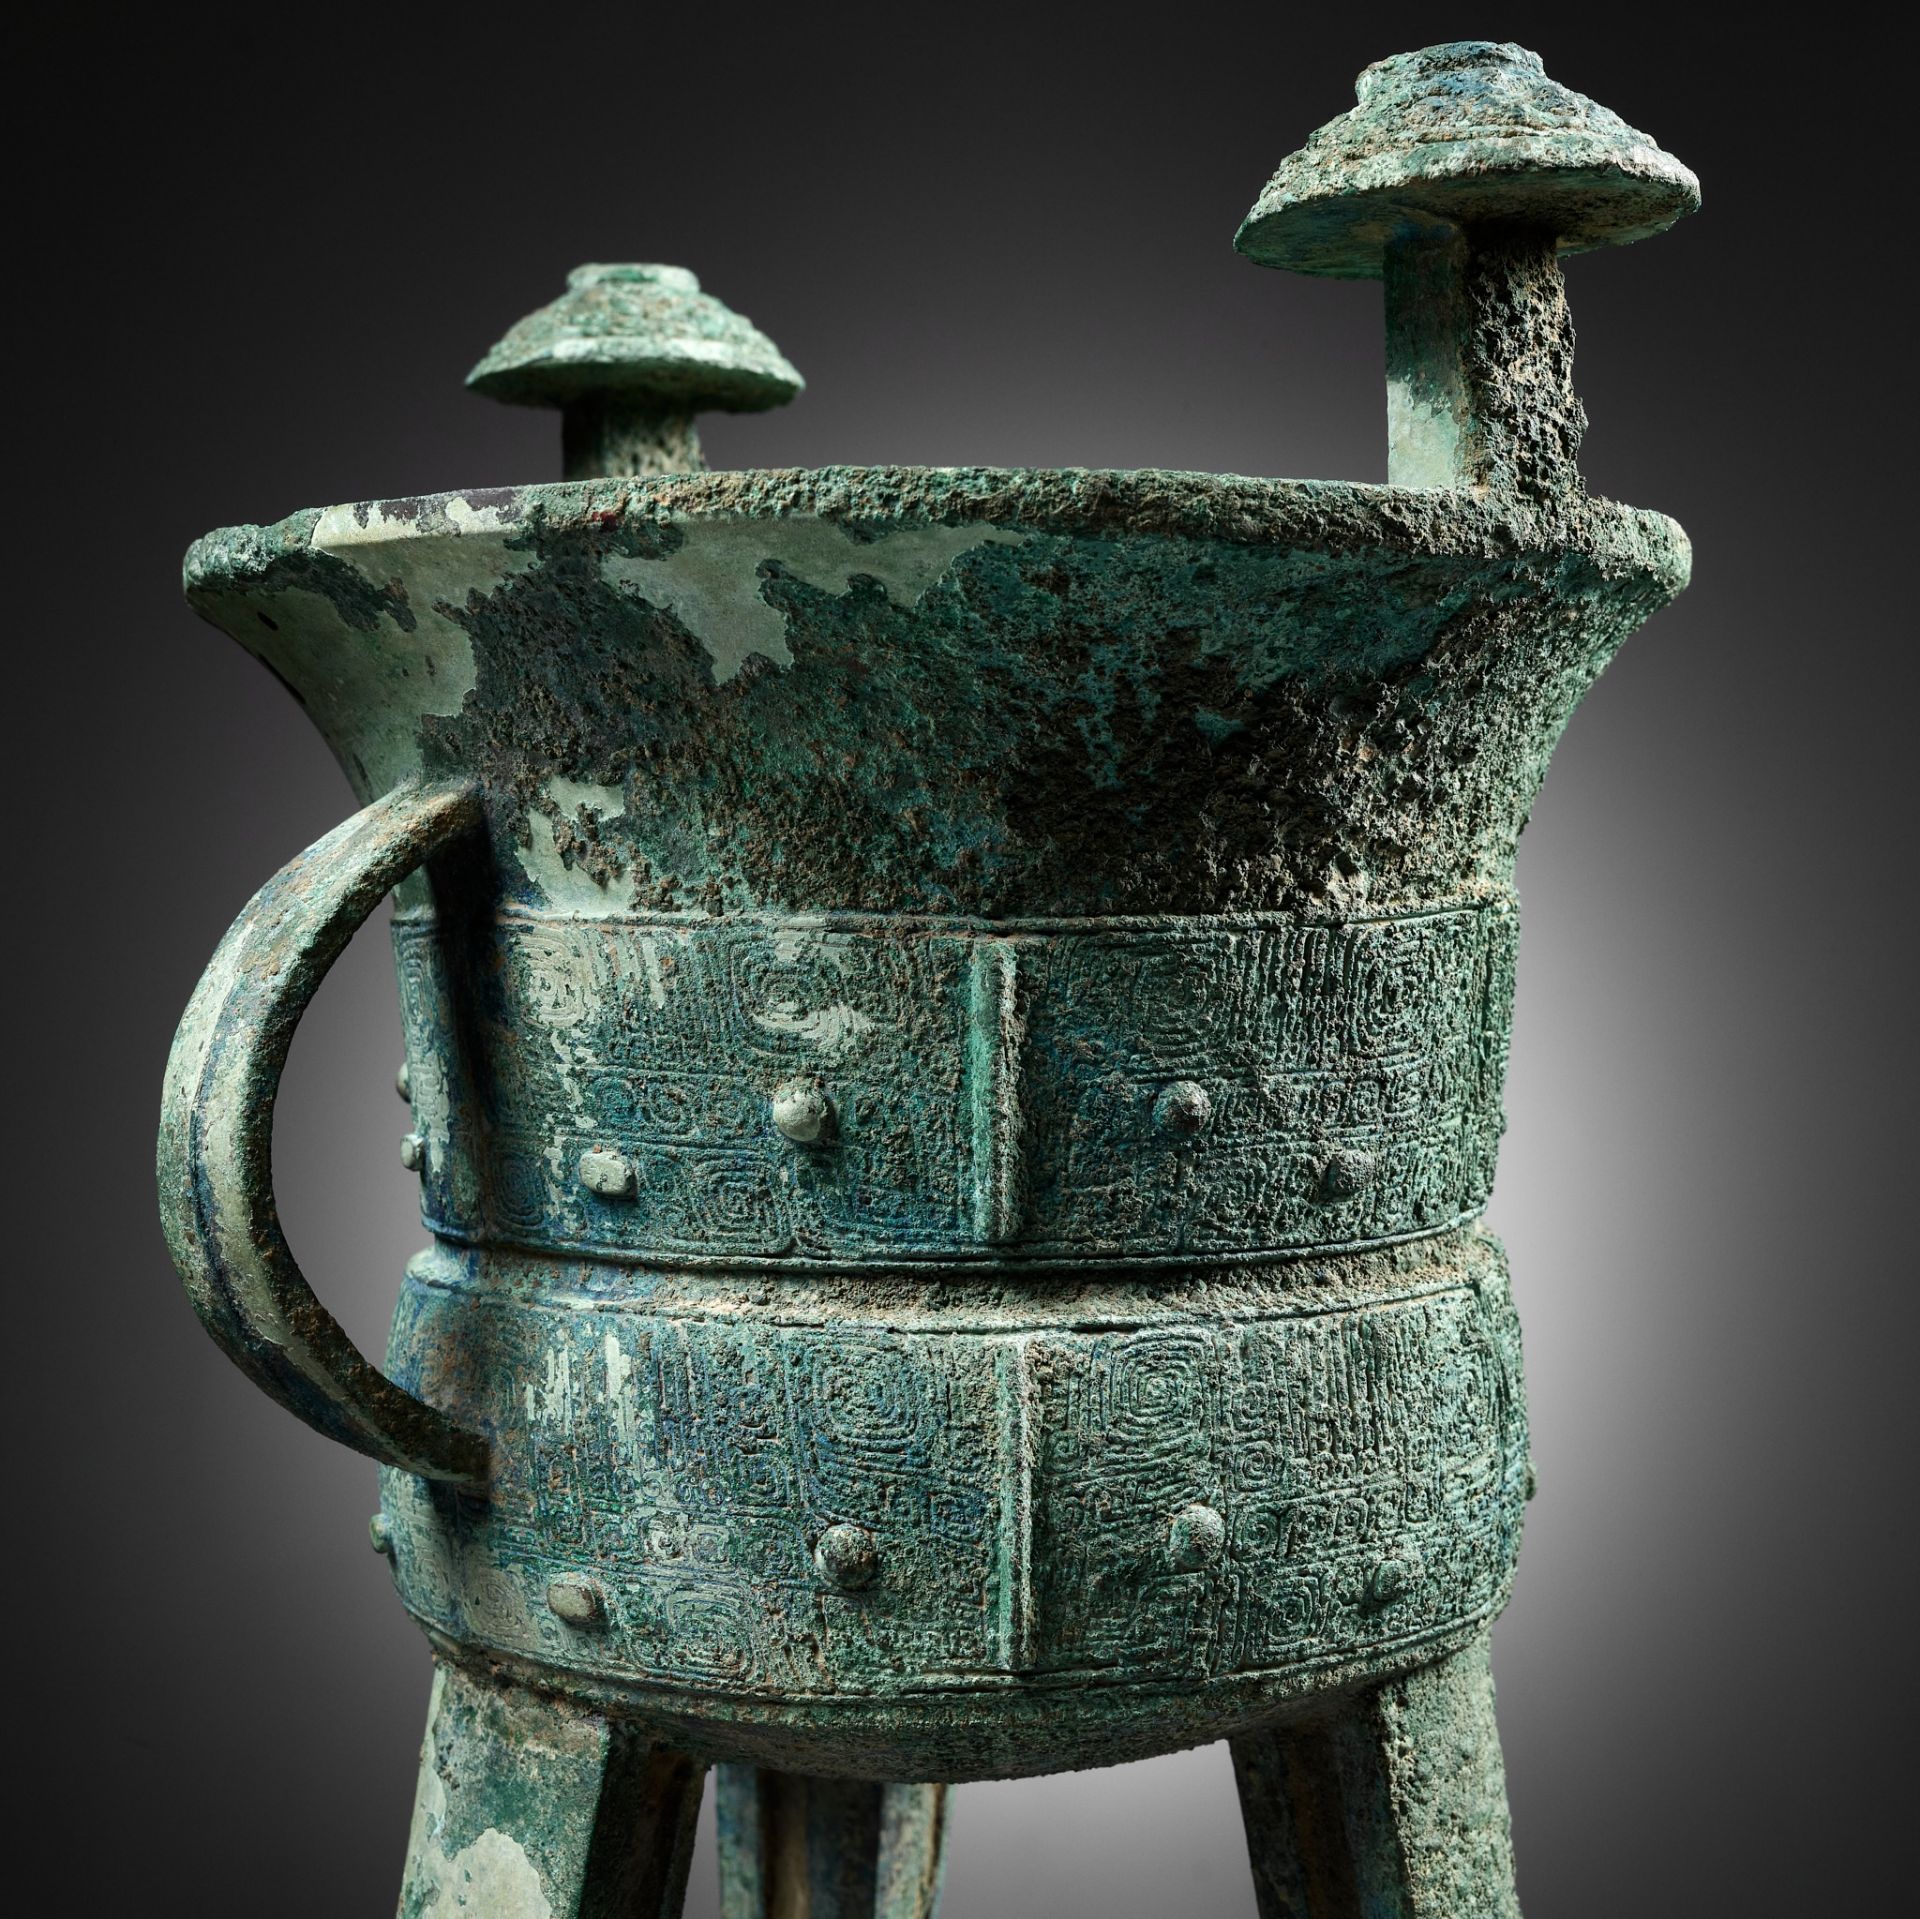 AN EXCEPTIONALLY LARGE AND MASSIVE BRONZE RITUAL TRIPOD WINE VESSEL, JIA, WITH A CLAN MARK, SHANG - Image 10 of 29